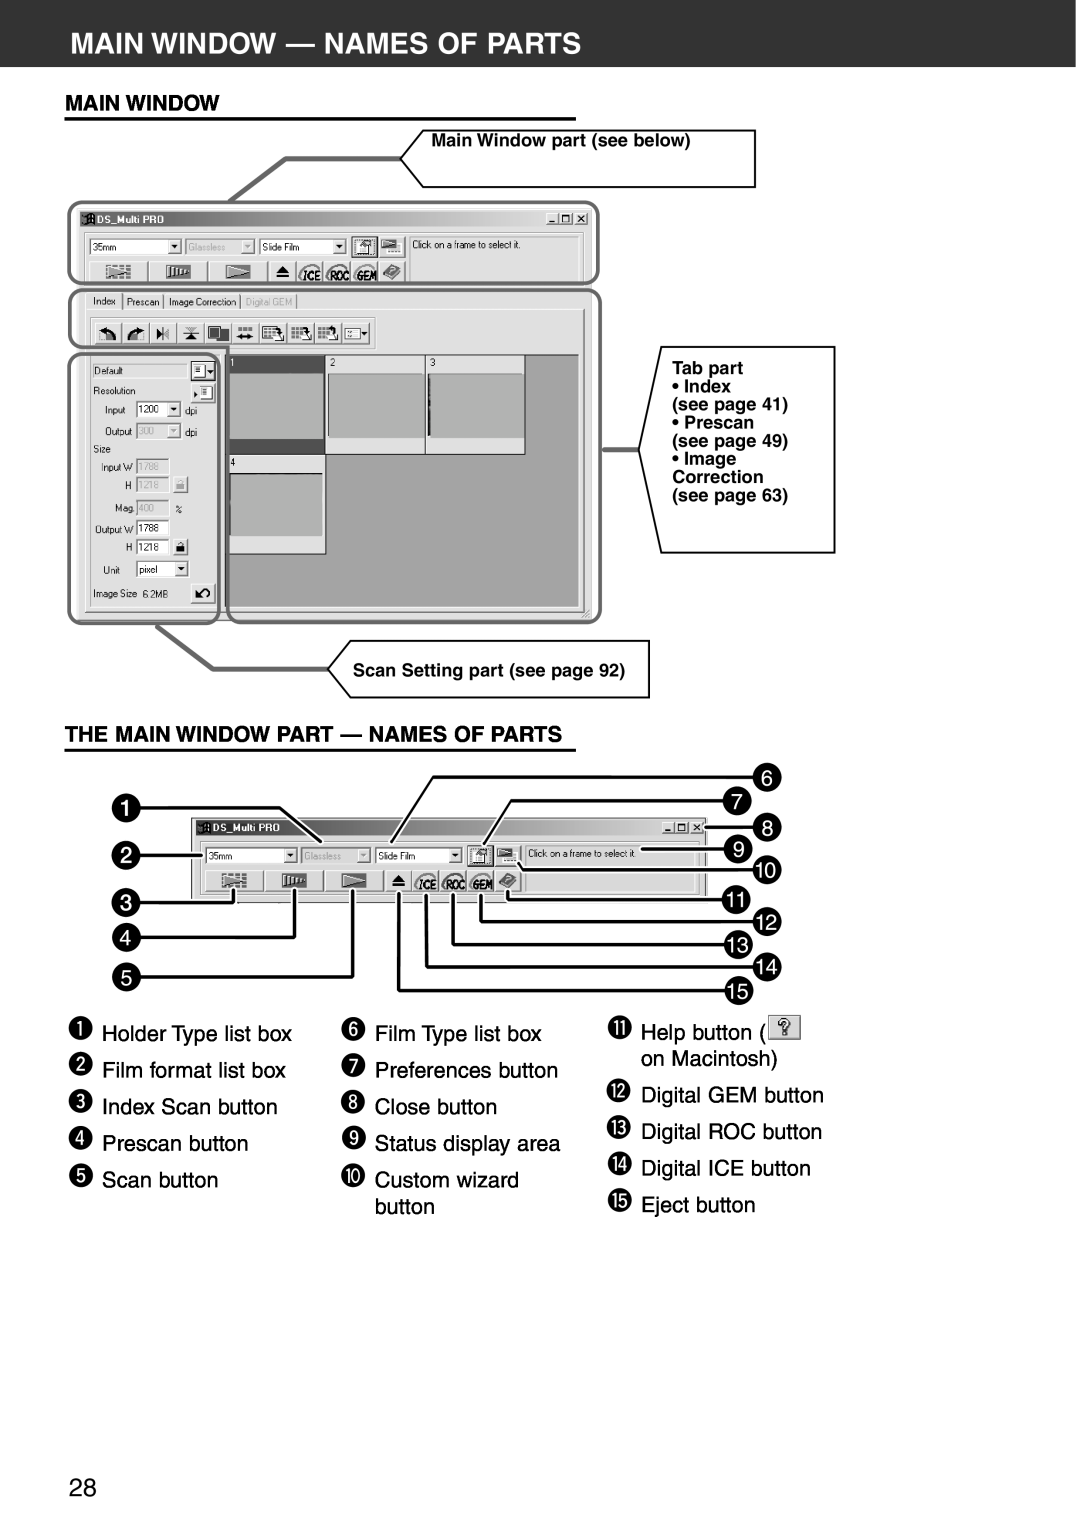 Konica Minolta Scan Multi PRO instruction manual Main Window - Names Of Parts, The Main Window Part - Names Of Parts 